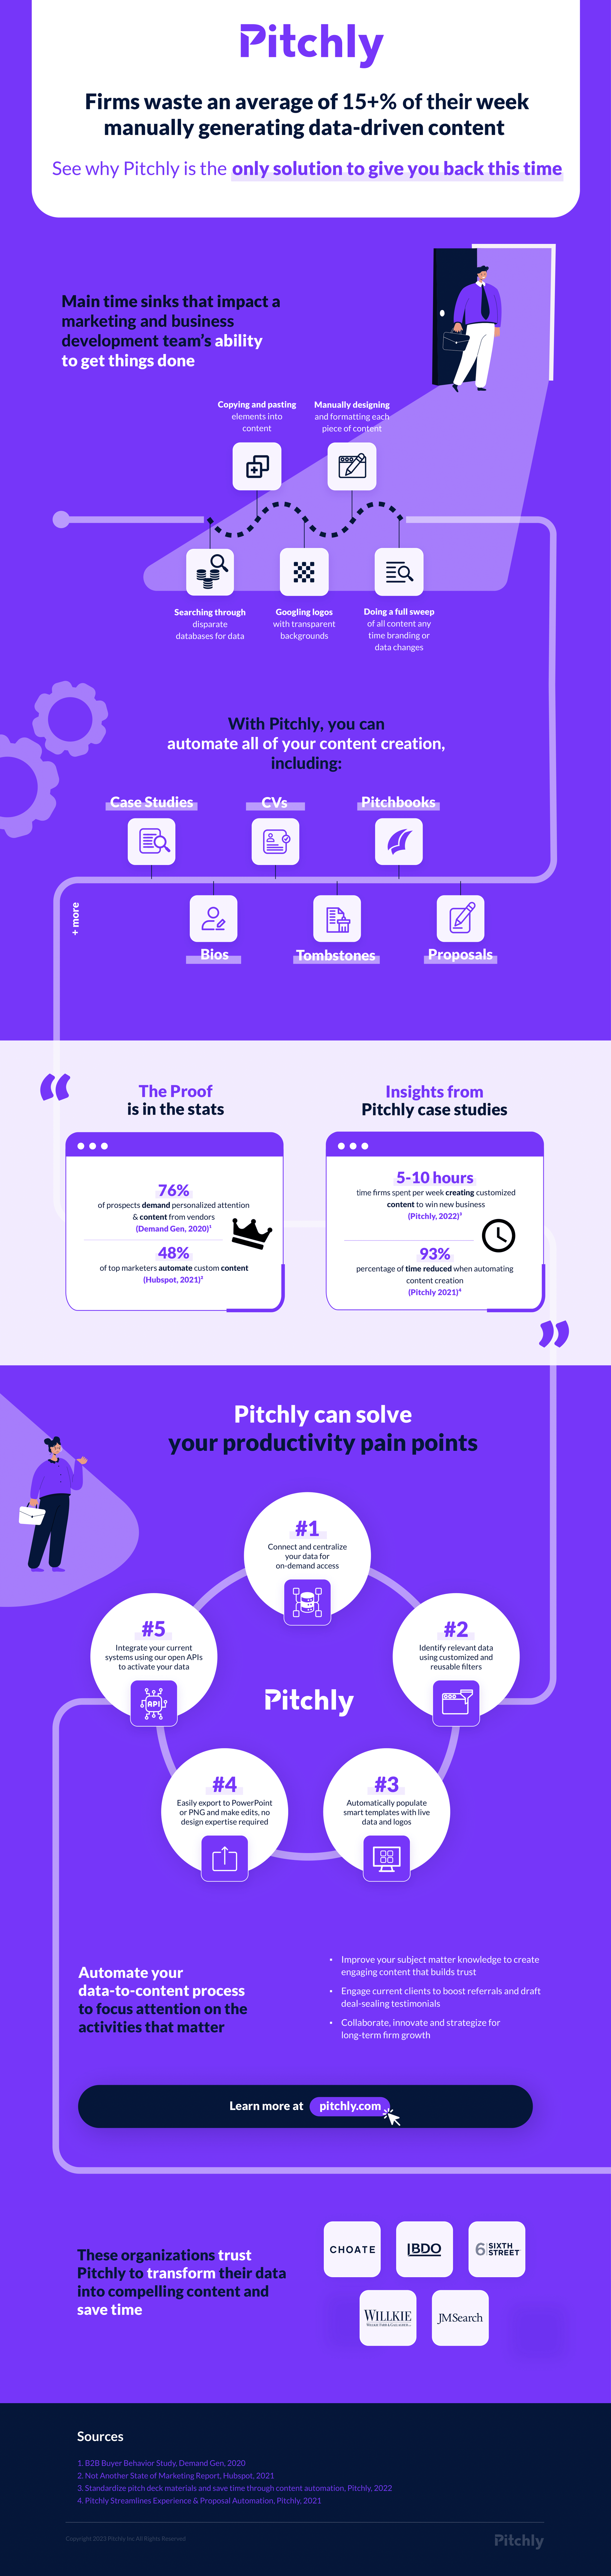 Why pitchly infographic-1